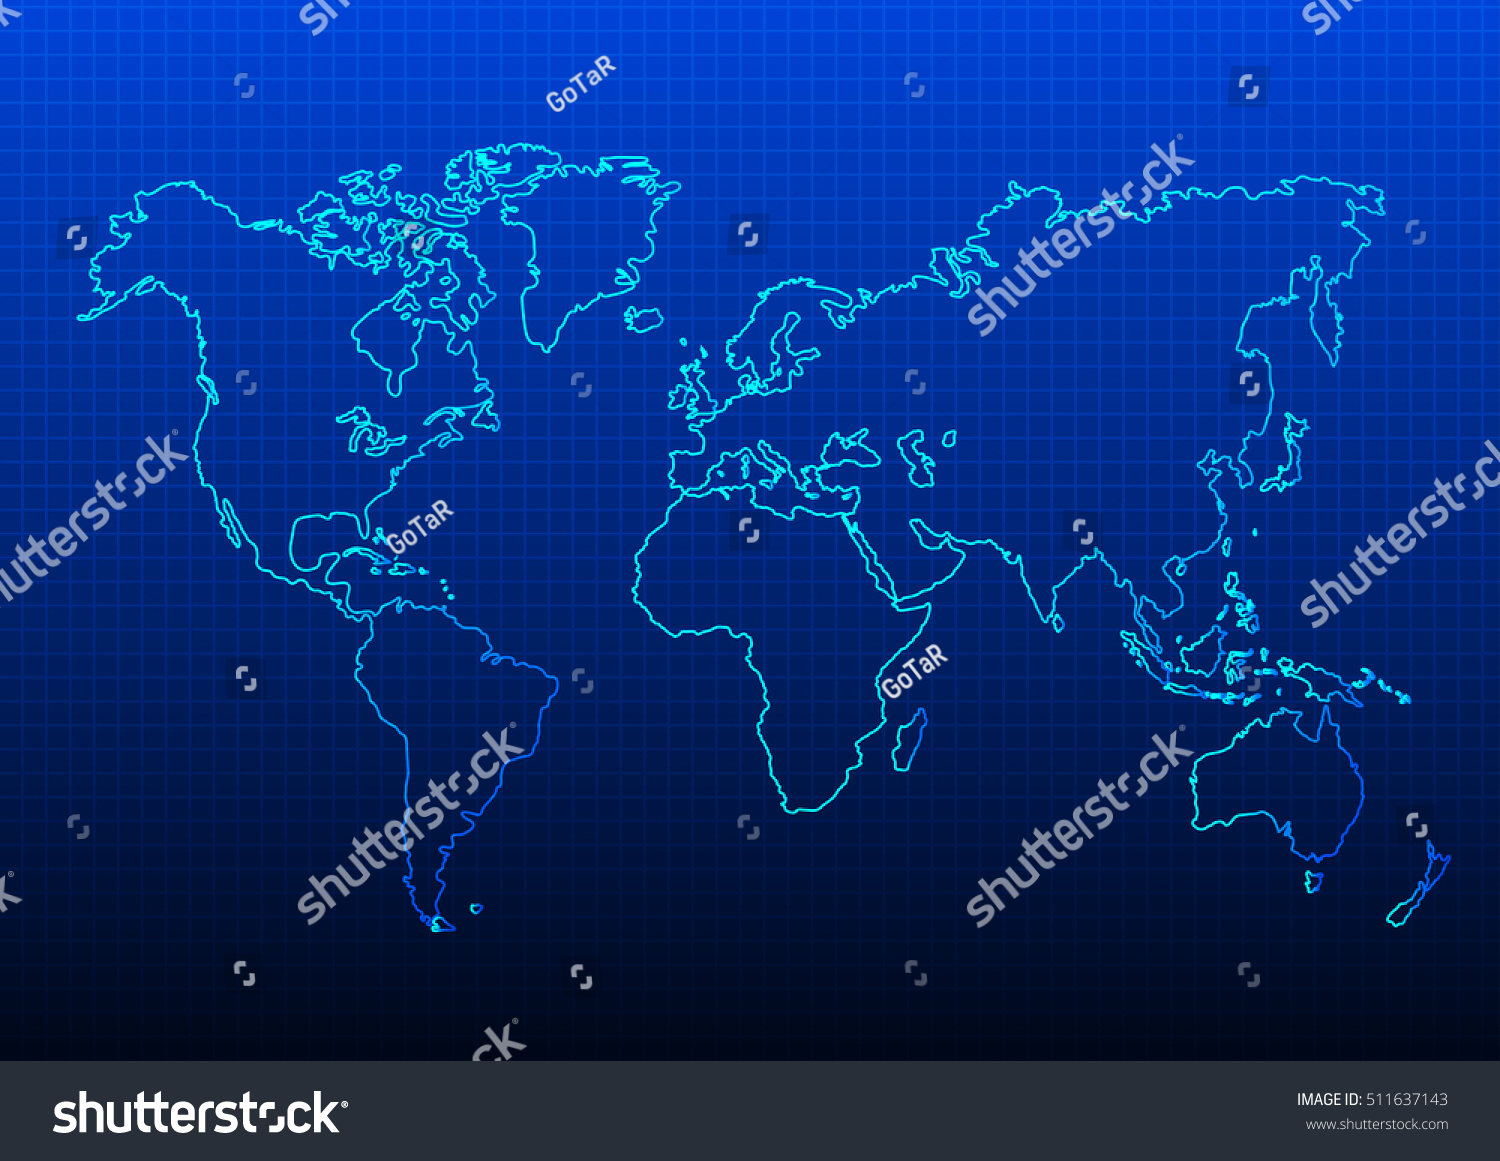 Maps Earths World Map Vector Illustration Stock Vector Royalty Free